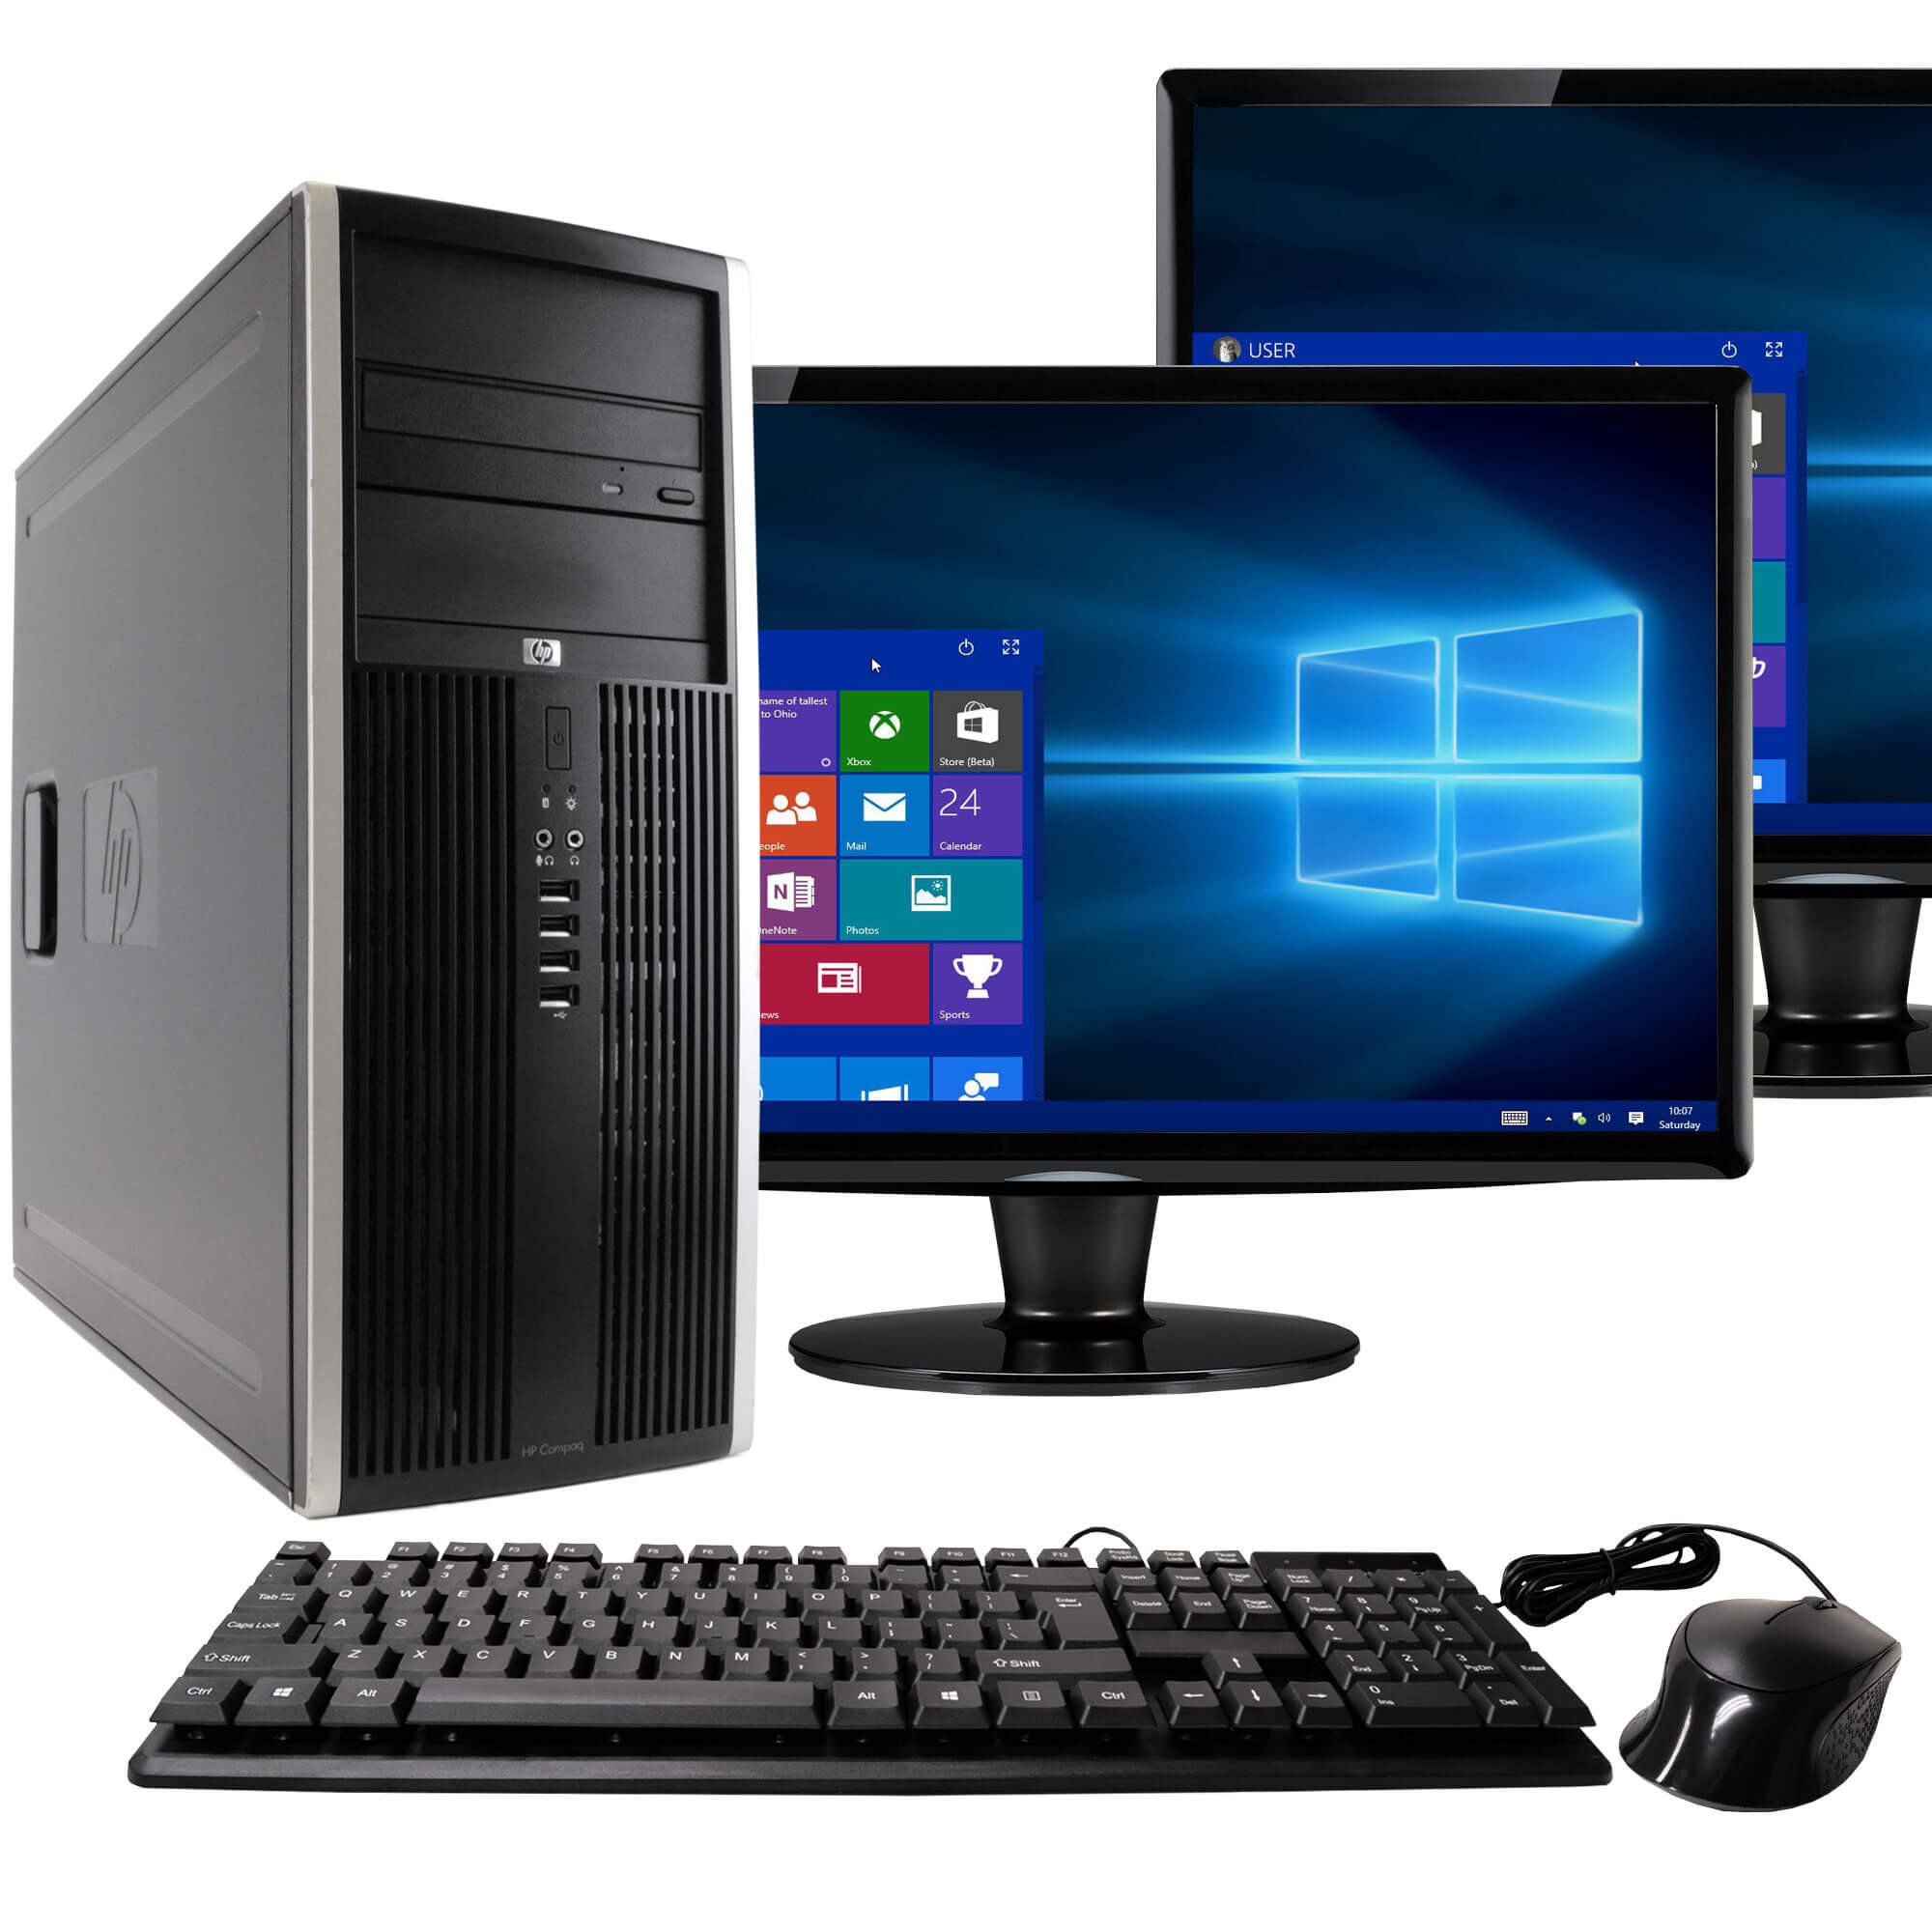 cyber monday gaming pc Cyber week gaming pc deals: what to expect in computers